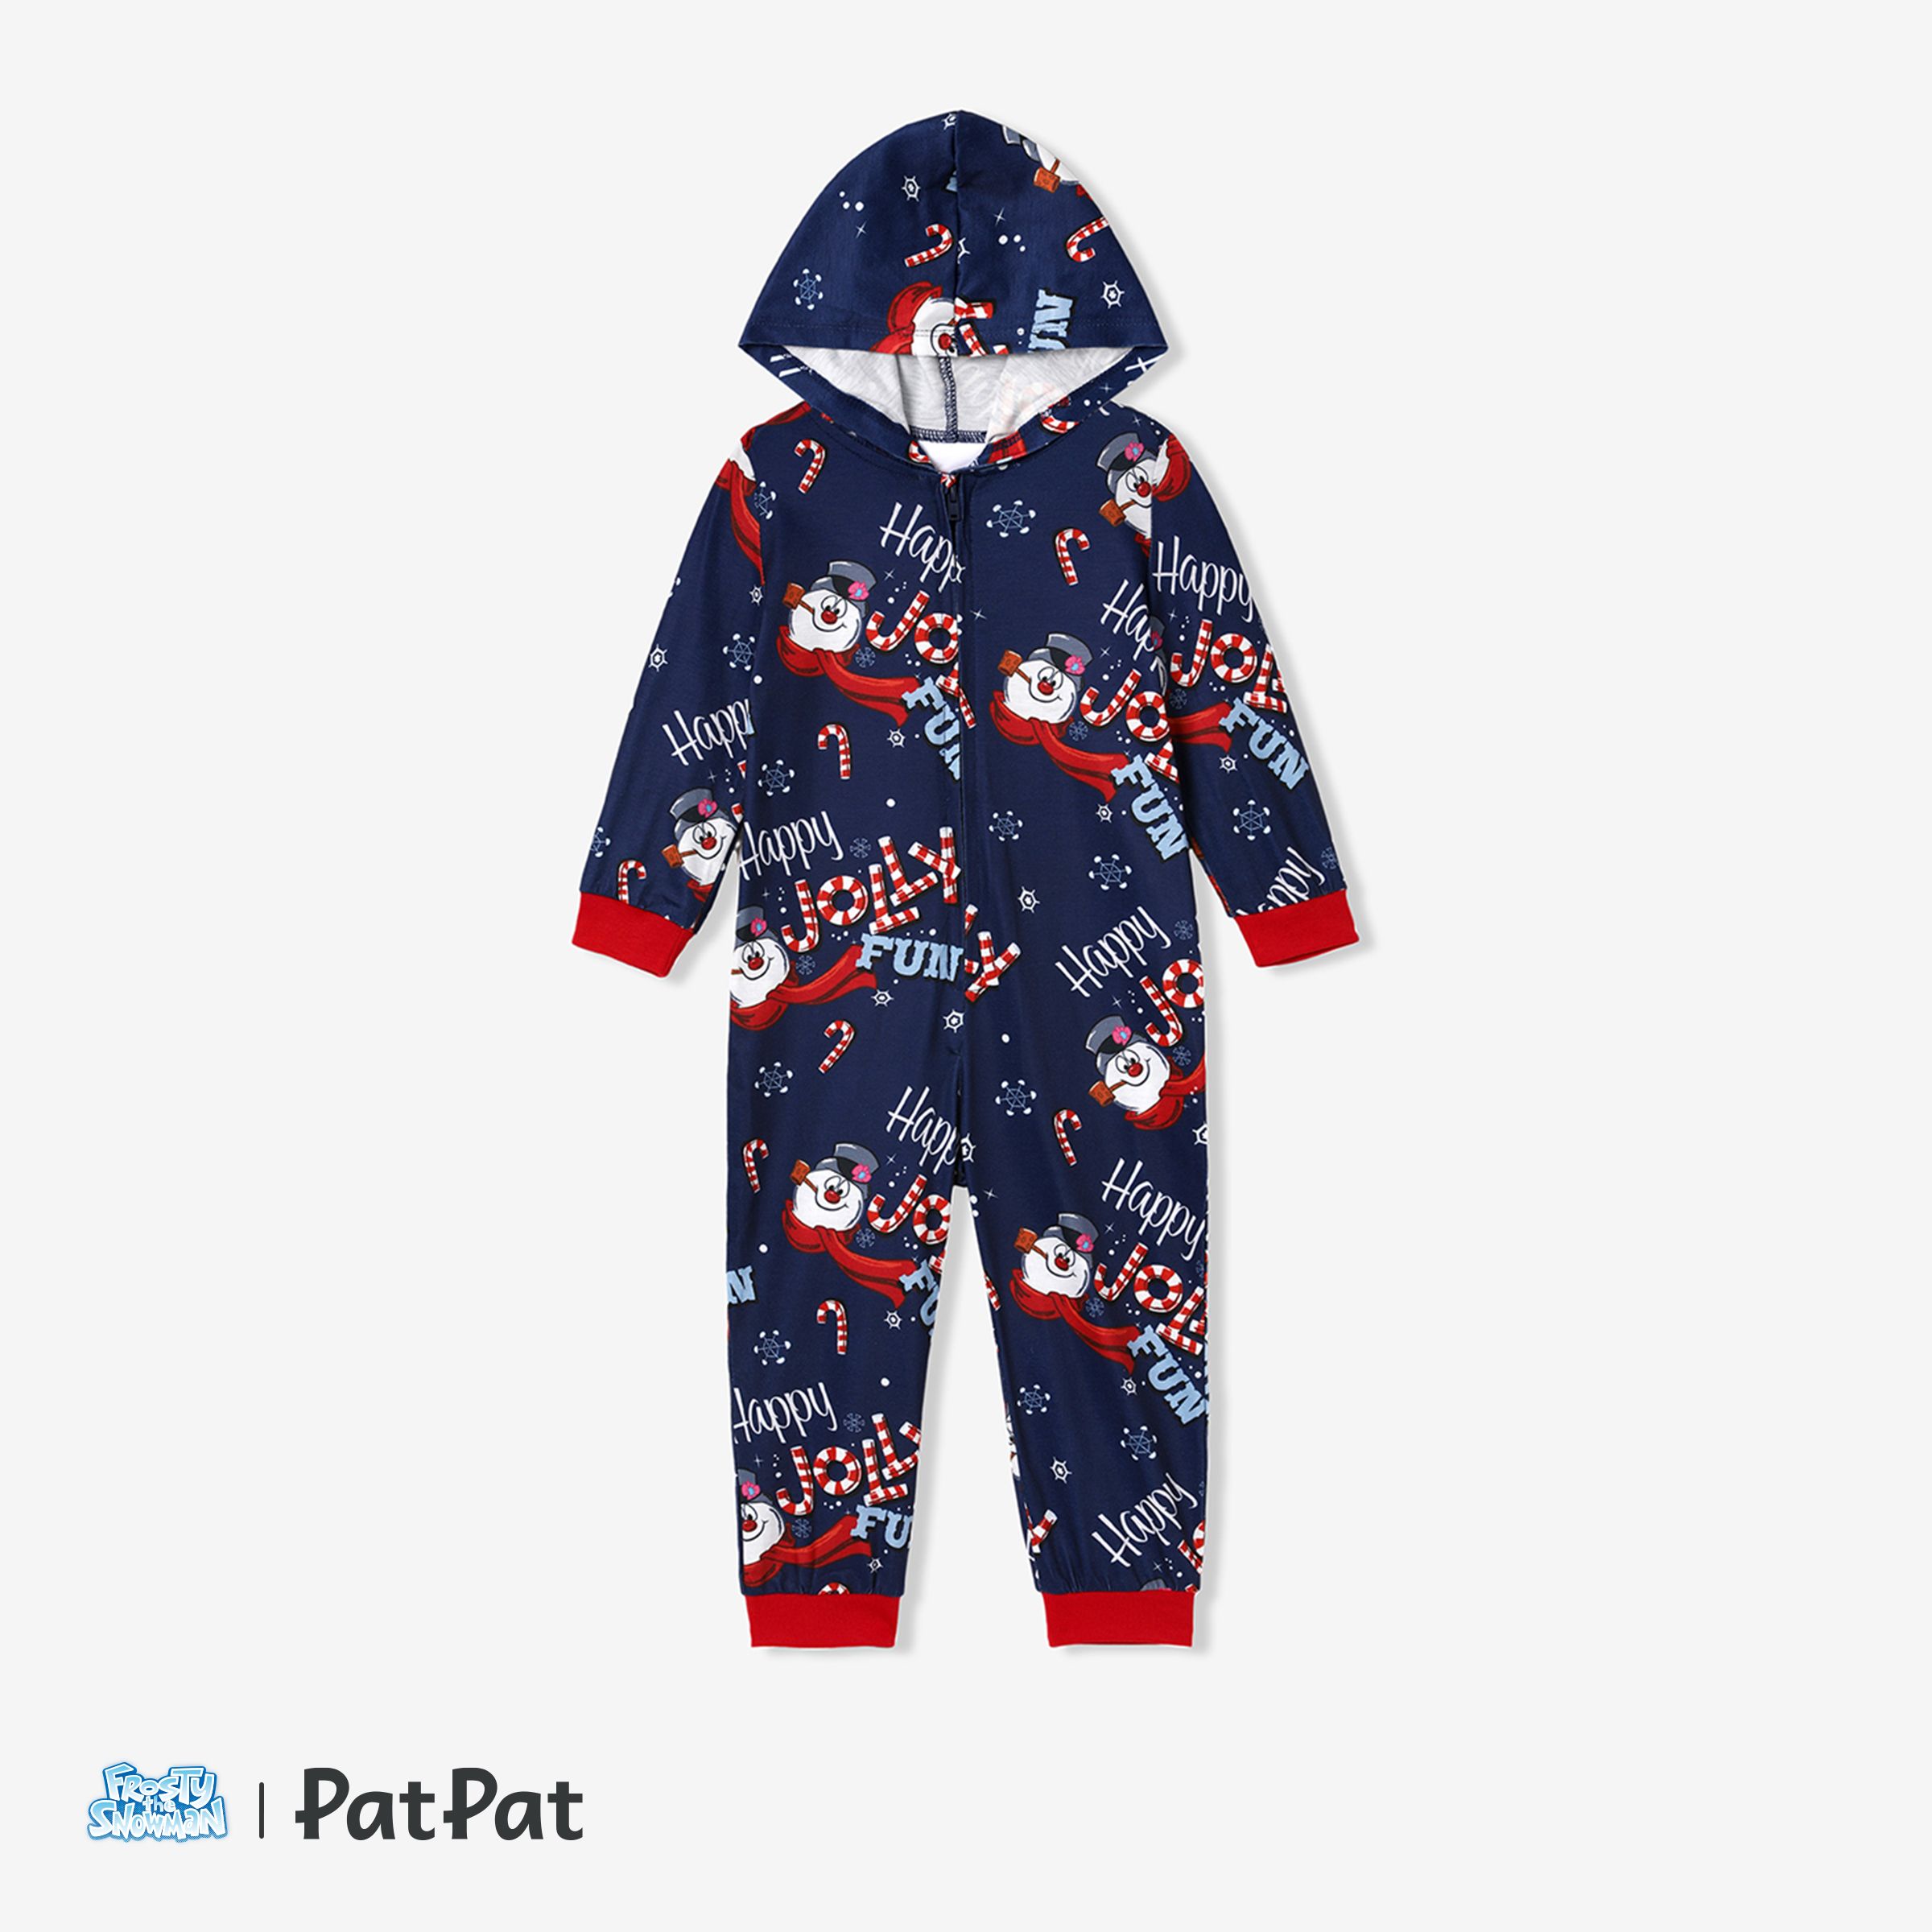 Frosty The Snowman Family Matching Noël Allover Zip-up Hooded Onesies Pajamas